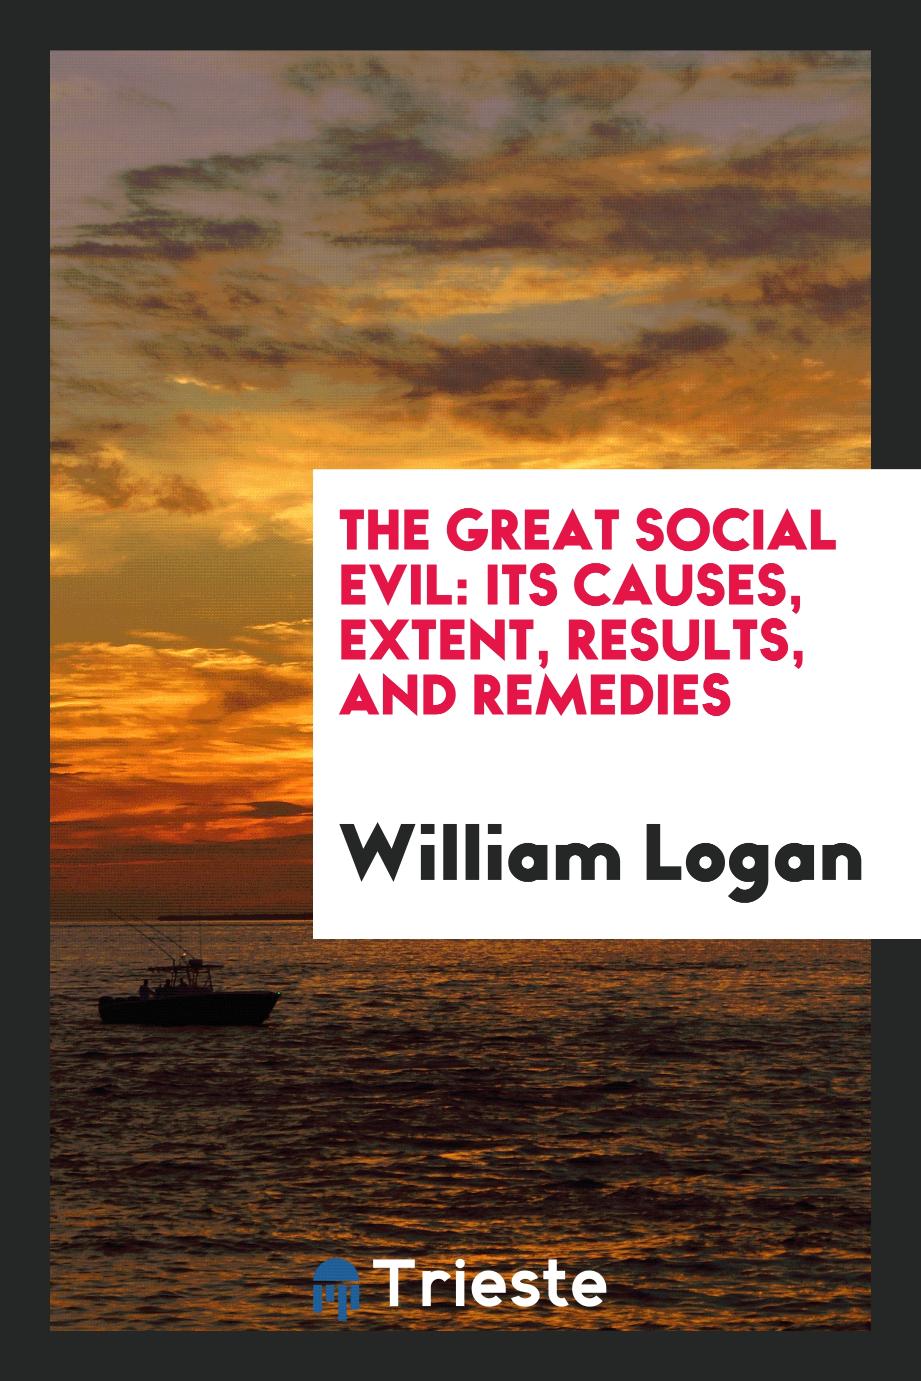 The Great Social Evil: Its Causes, Extent, Results, and Remedies